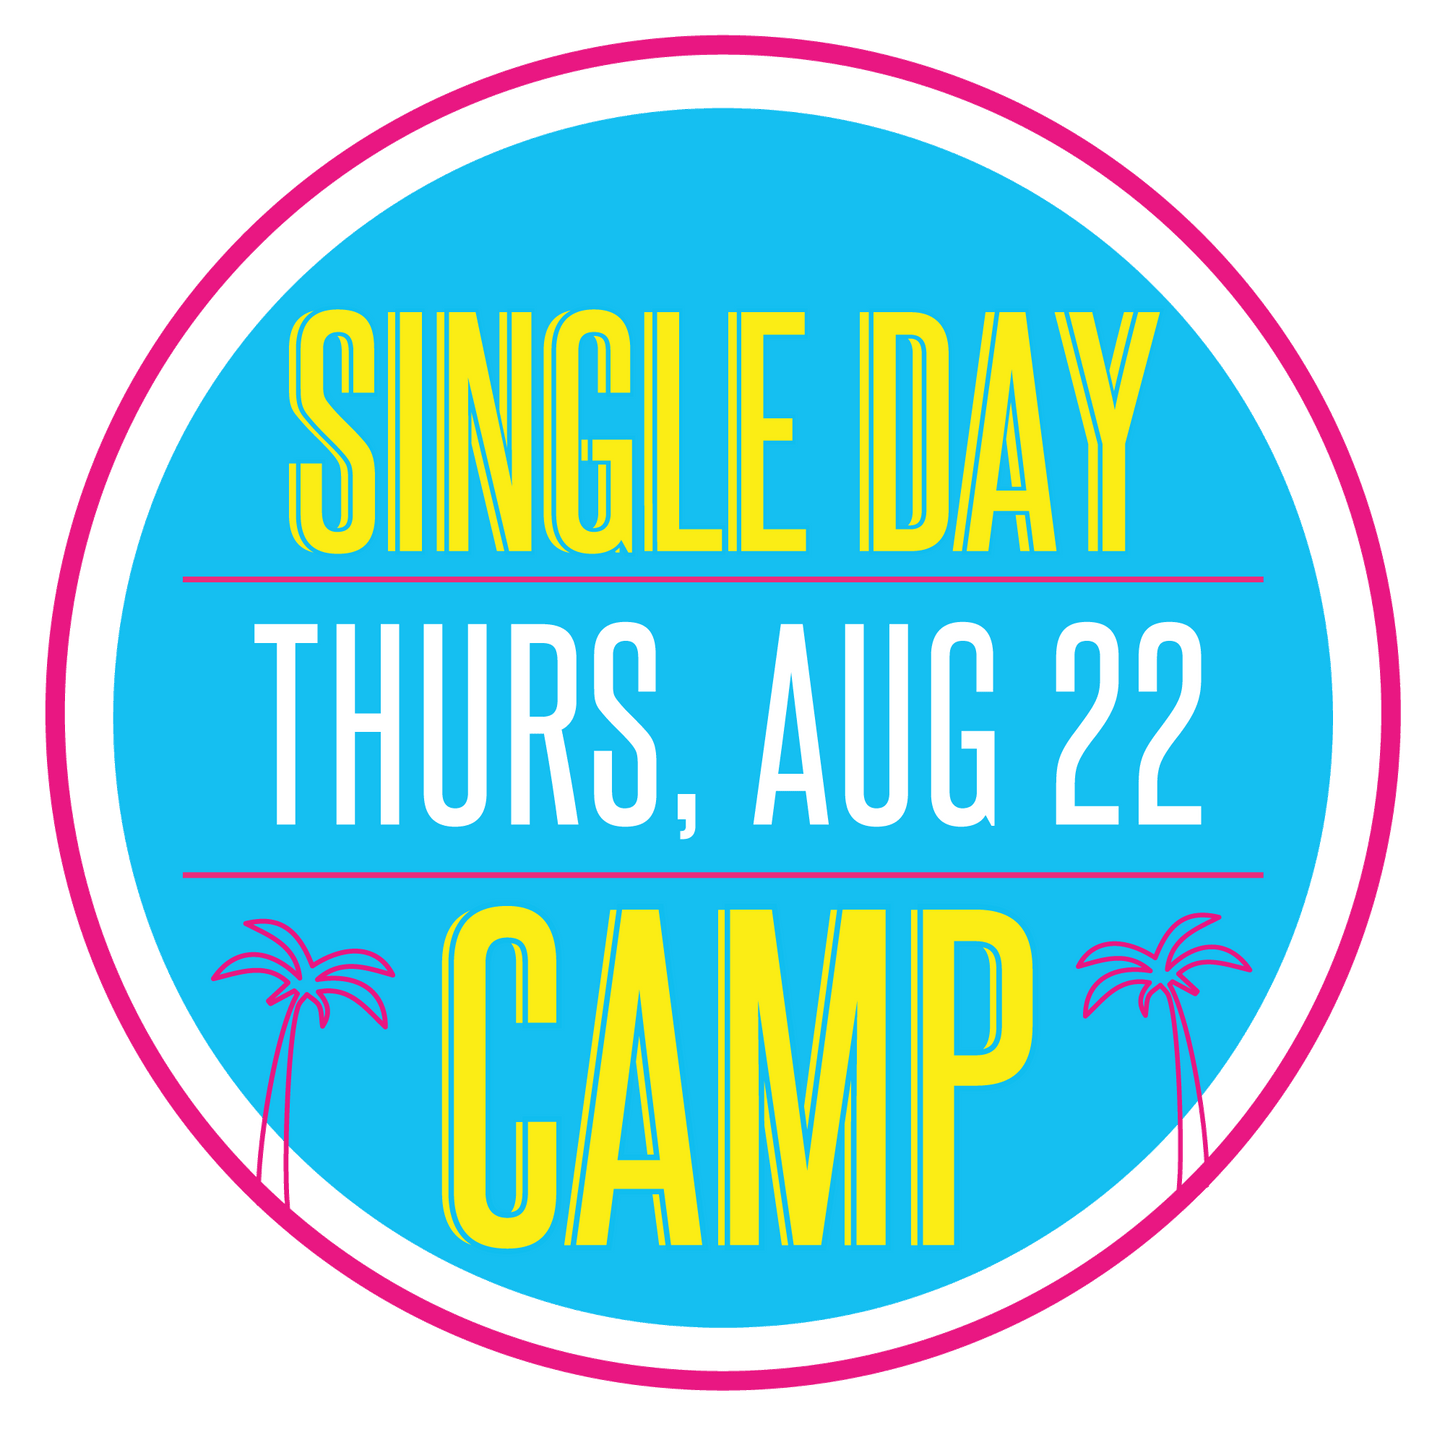 Single Day Sewing Workshop: Thursday, August 22, 9am-3pm